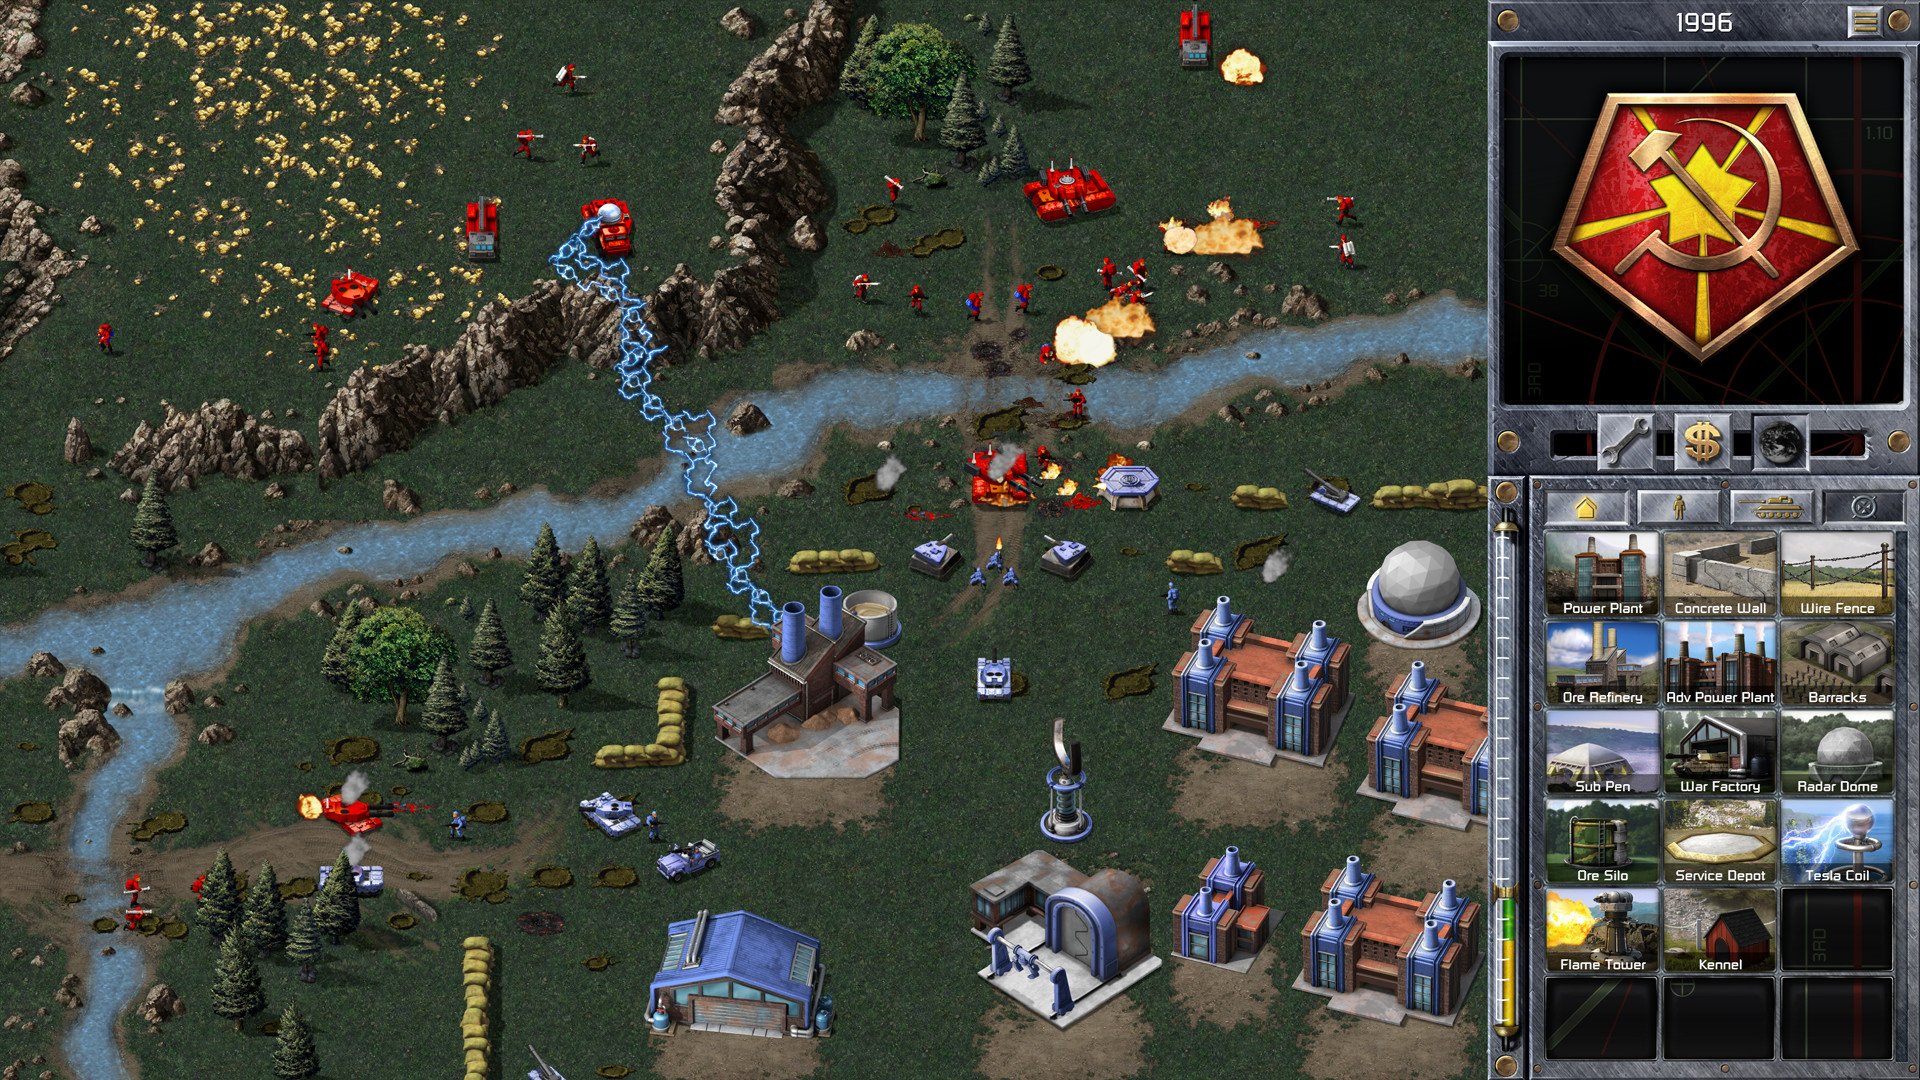 Command and conquer remastered. Command Conquer Remastered collection 2020. Command & Conquer Remastered collection. Red Alert 1 Remastered. Стратегия Red Alert 1.